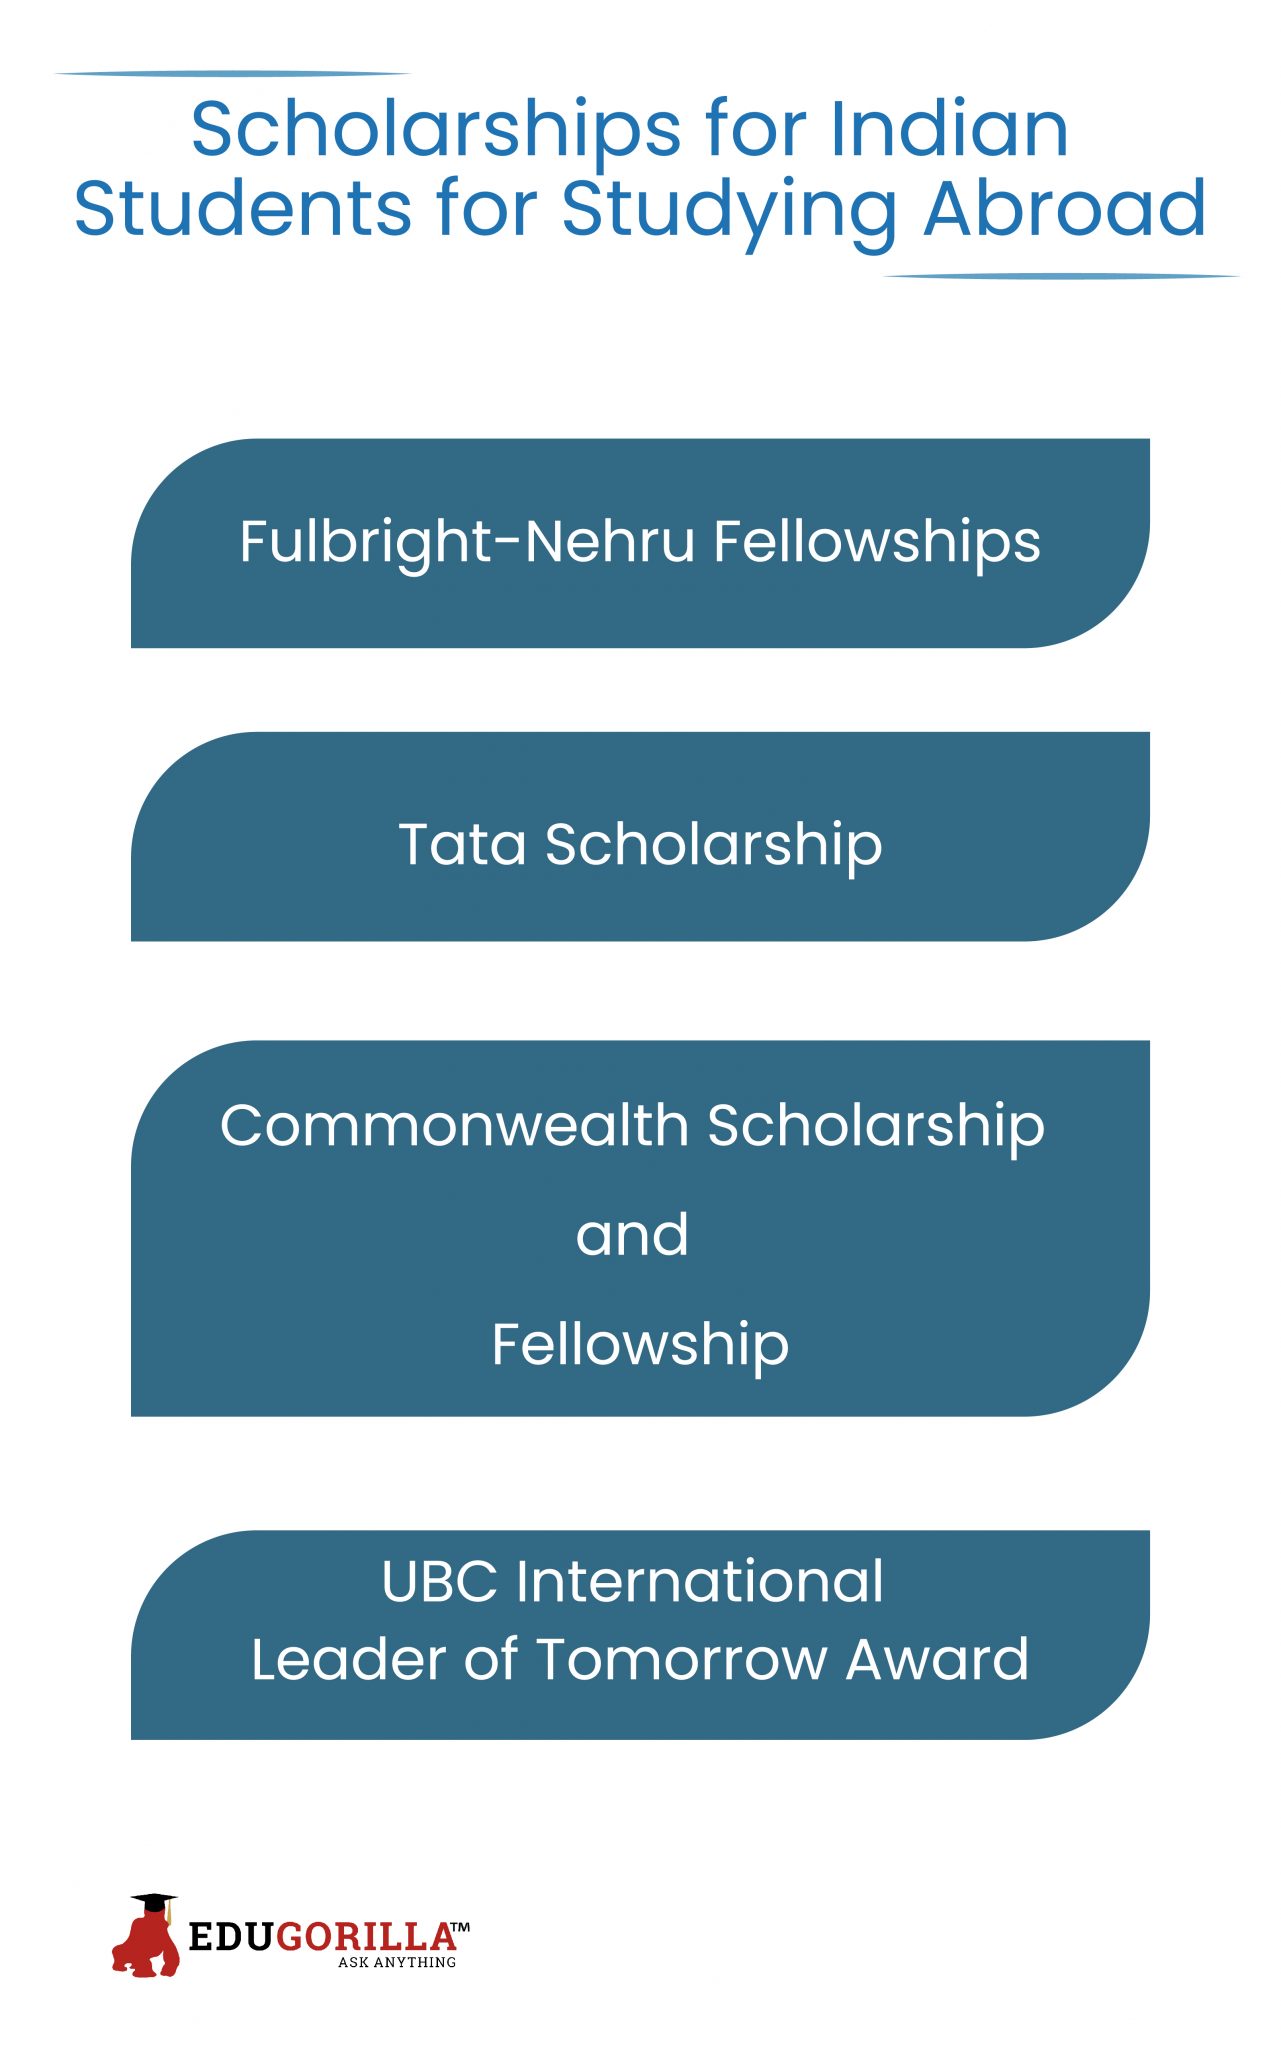 Scholarships for Indian Students for Studying Abroad